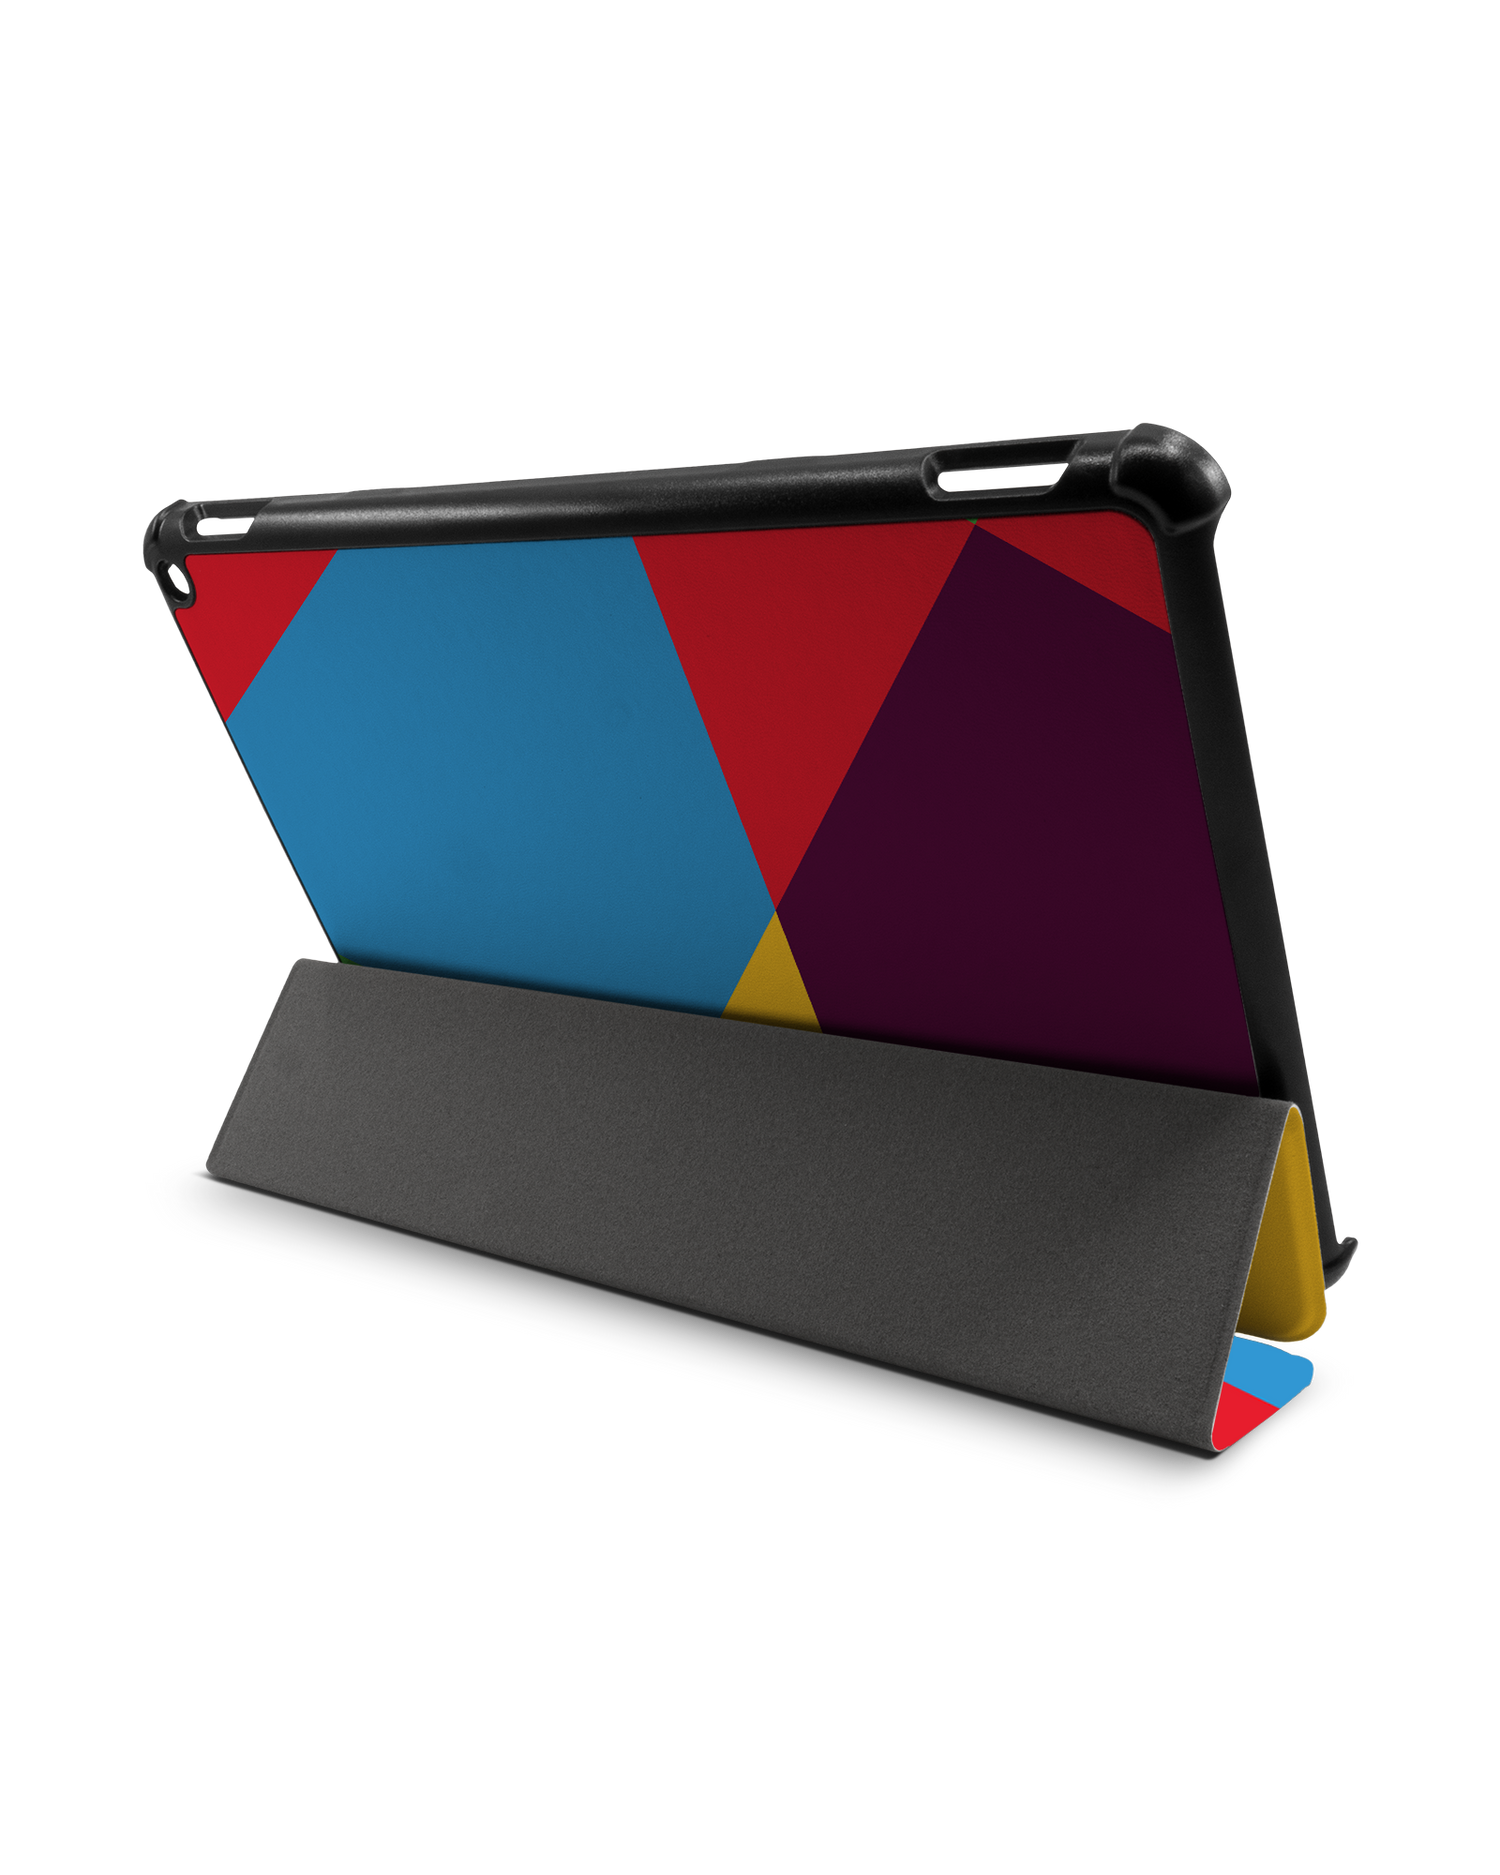 Pringles Abstract Tablet Smart Case for Amazon Fire HD 10 (2021): Used as Stand